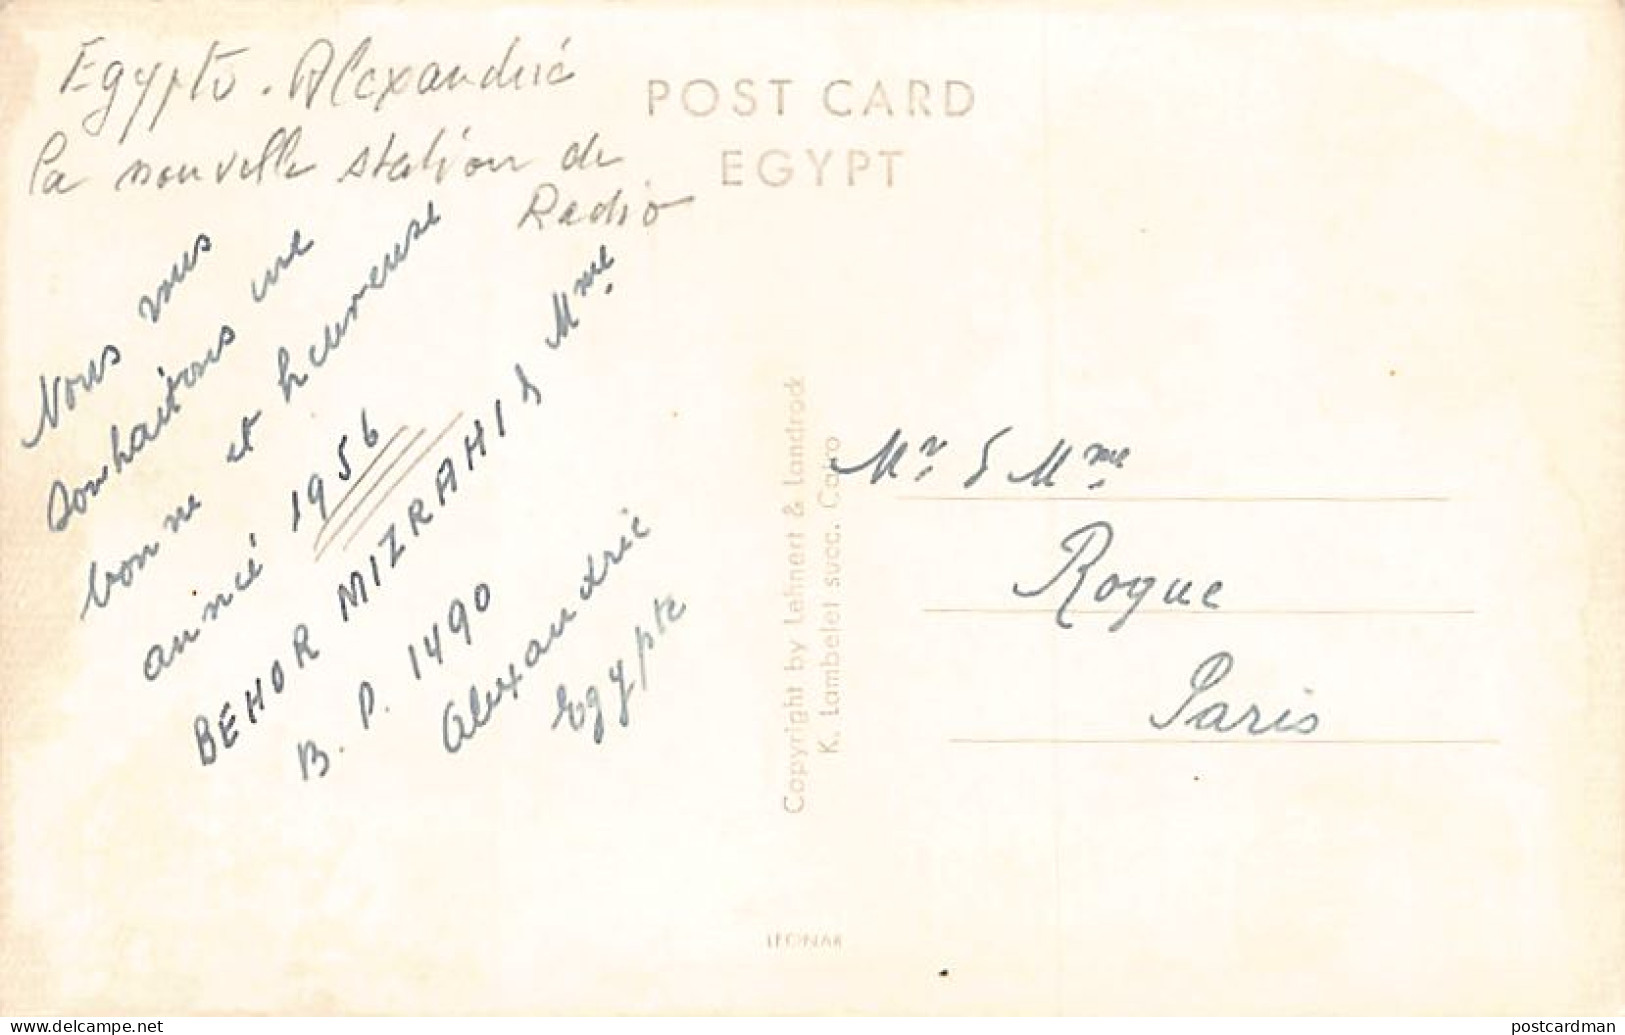 Egypt - ALEXANDRIA - The New Radio Station - REAL PHOTO - Publ. Unknown  - Alexandrie